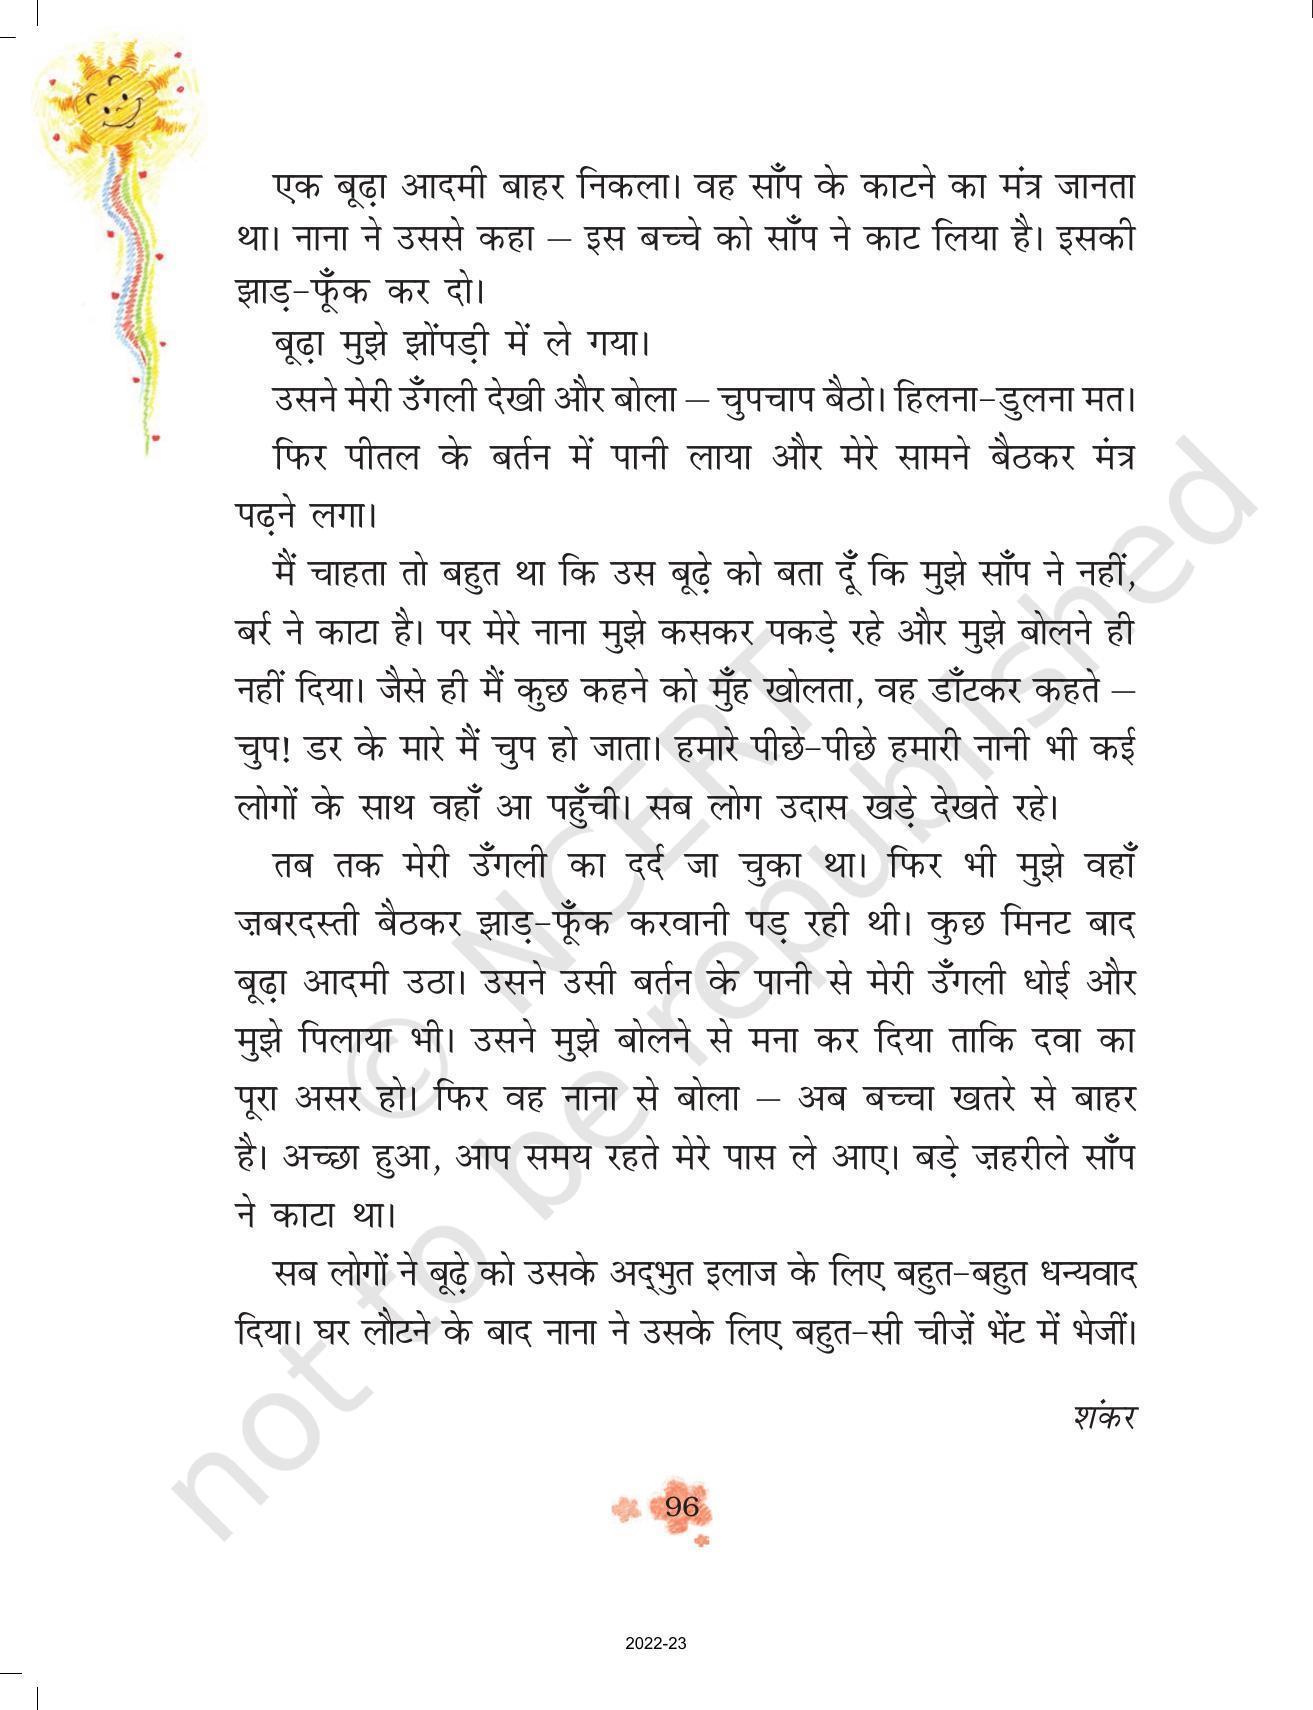 NCERT Book for Class 3 Hindi Chapter 10-जब मुझे साँप ने काटा - Page 4